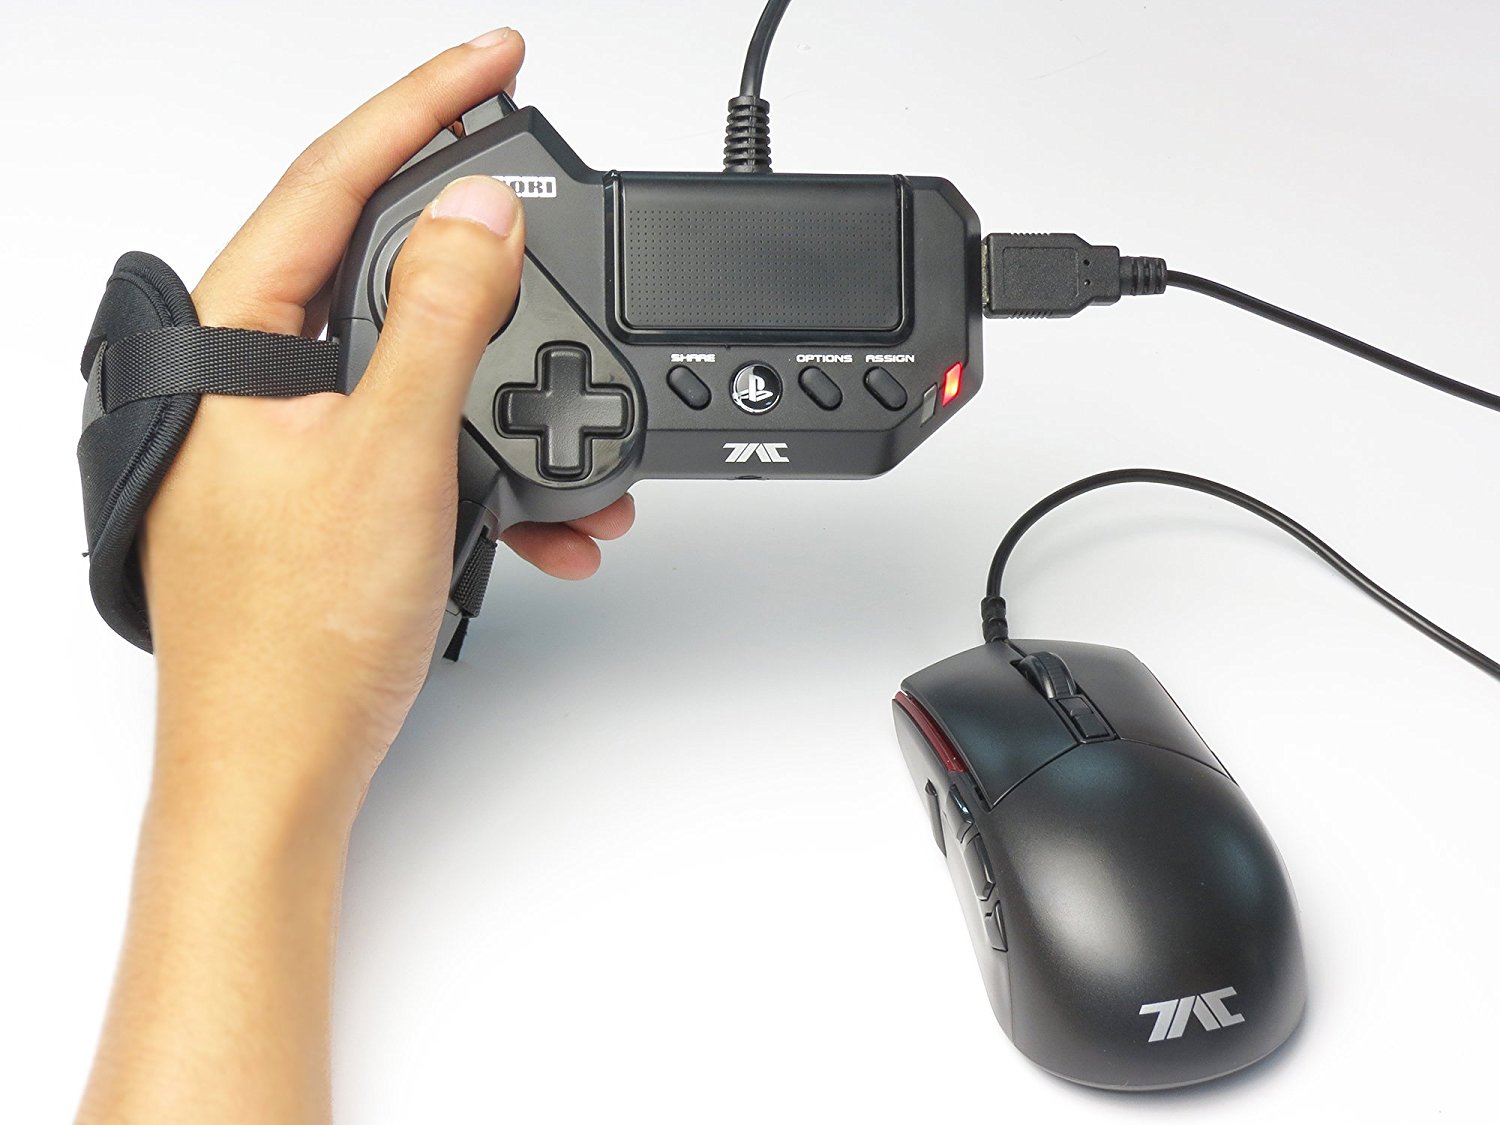 Joystick and Mouse